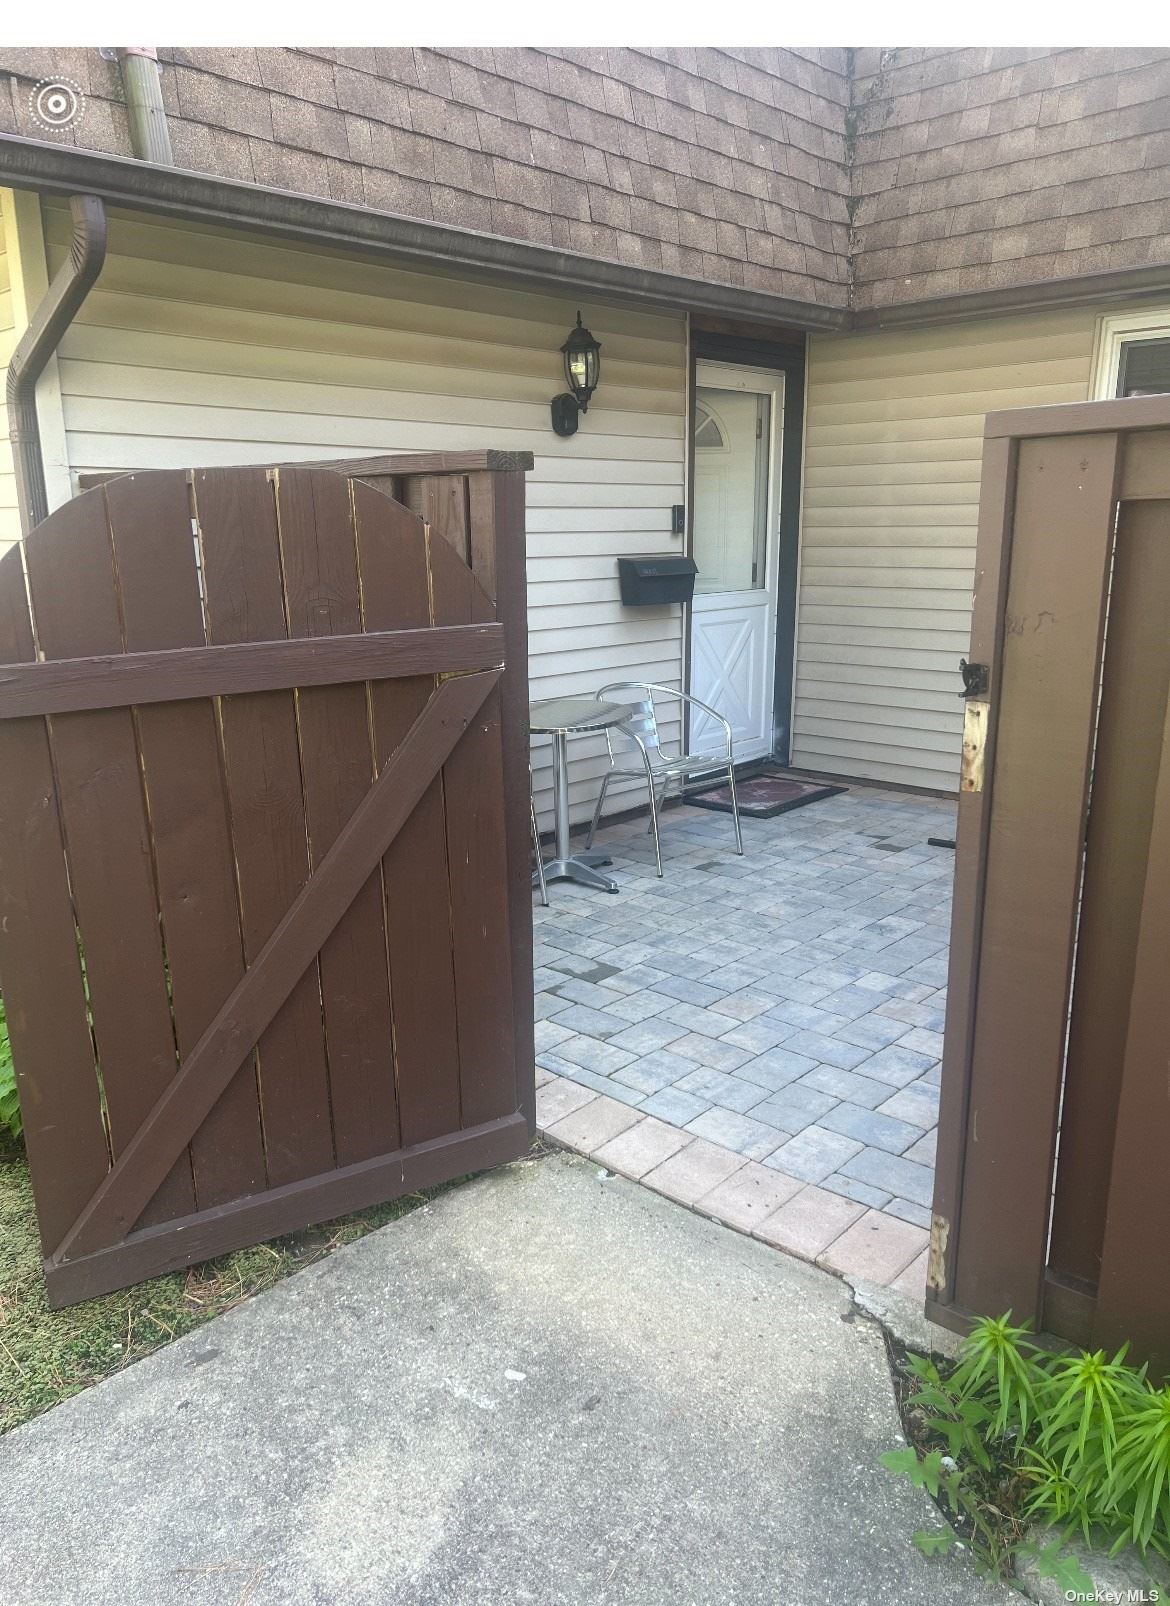 a view of front door and small yard